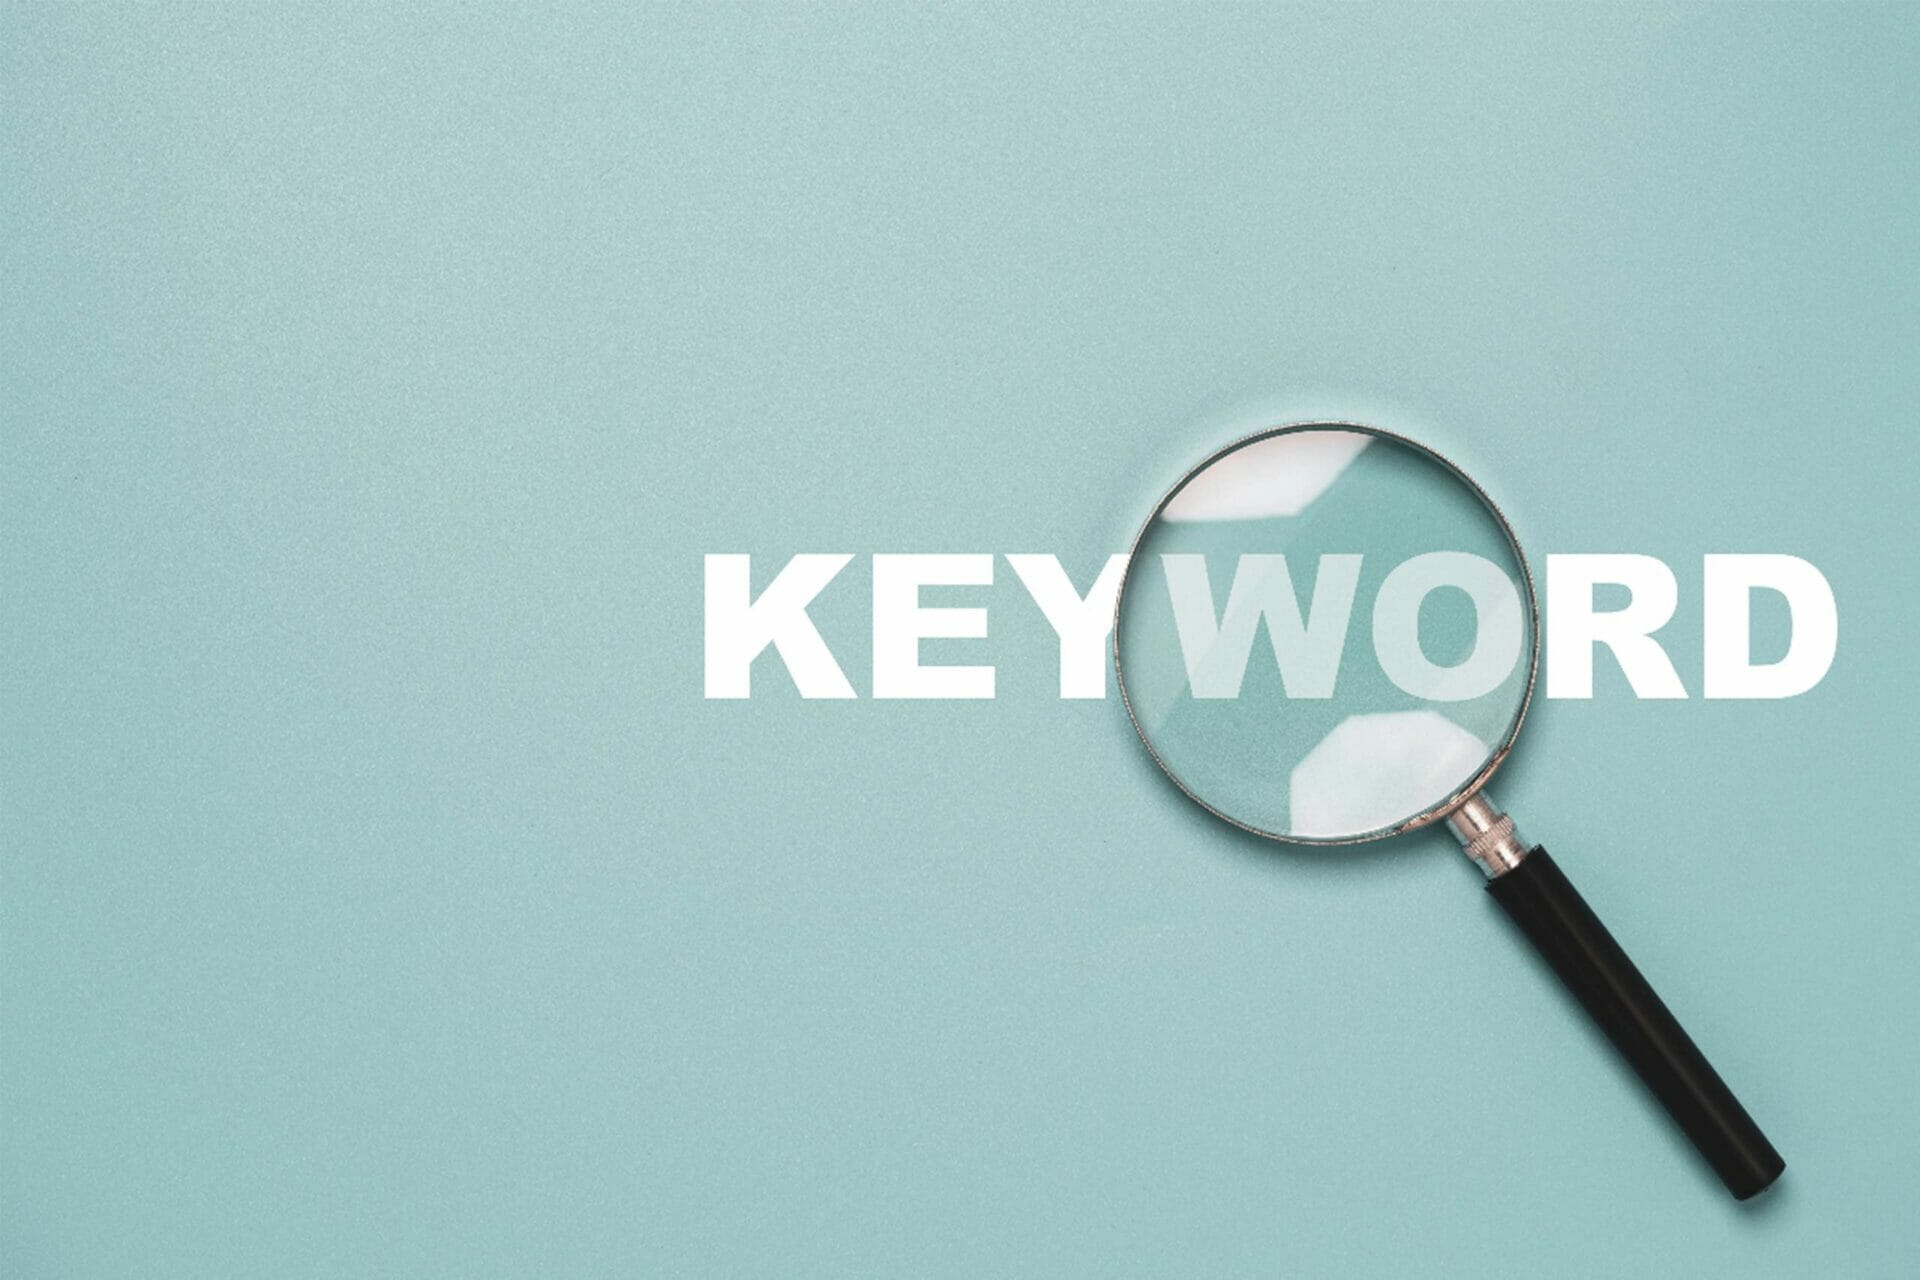 Support the success of your Amazon ad campaign by identifying the keywords that connect with the right customers and drive conversions.